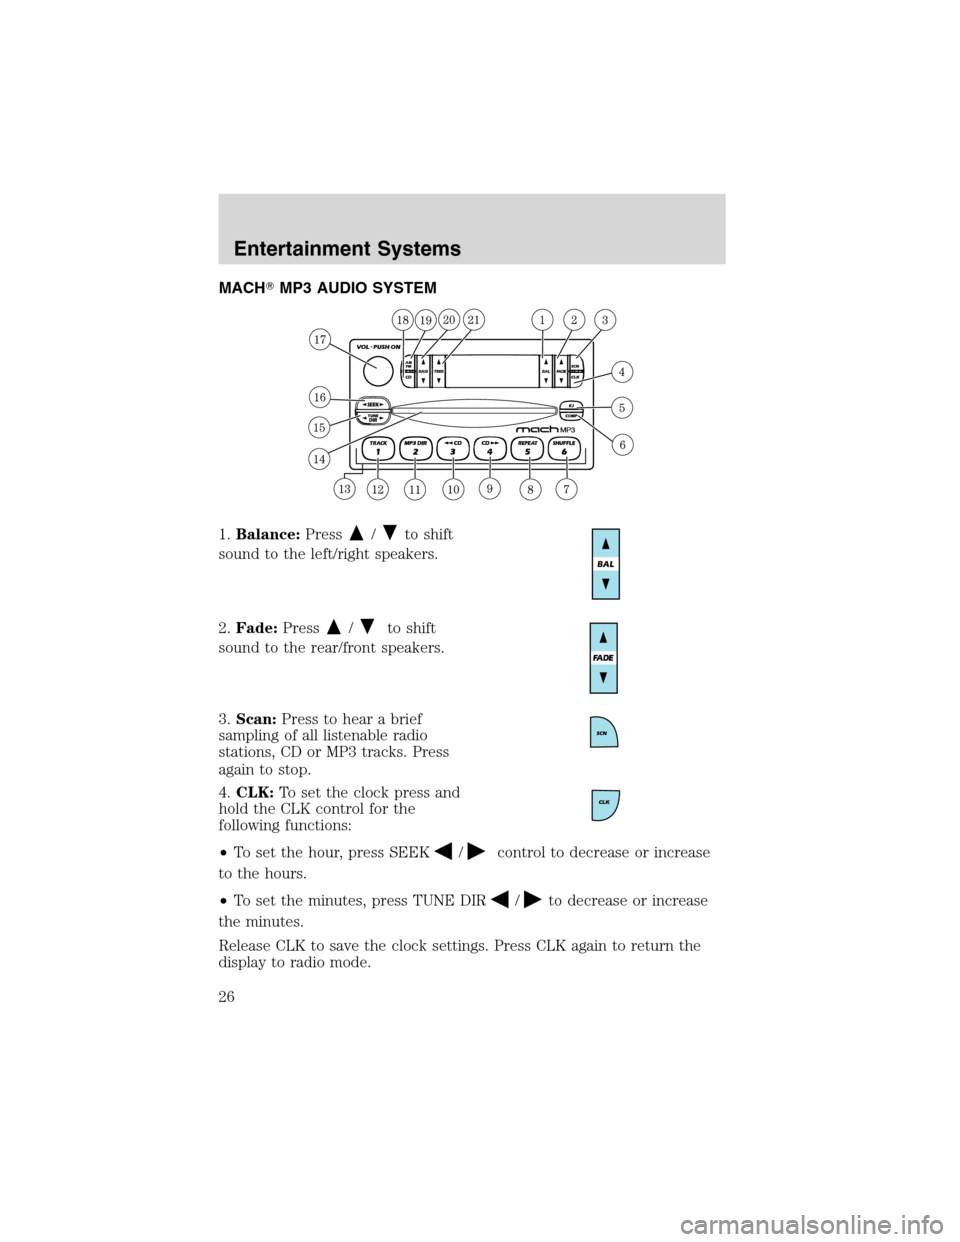 FORD ESCAPE 2003 1.G Owners Manual MACHMP3 AUDIO SYSTEM
1.Balance:Press
/to shift
sound to the left/right speakers.
2.Fade:Press
/to shift
sound to the rear/front speakers.
3.Scan:Press to hear a brief
sampling of all listenable radio